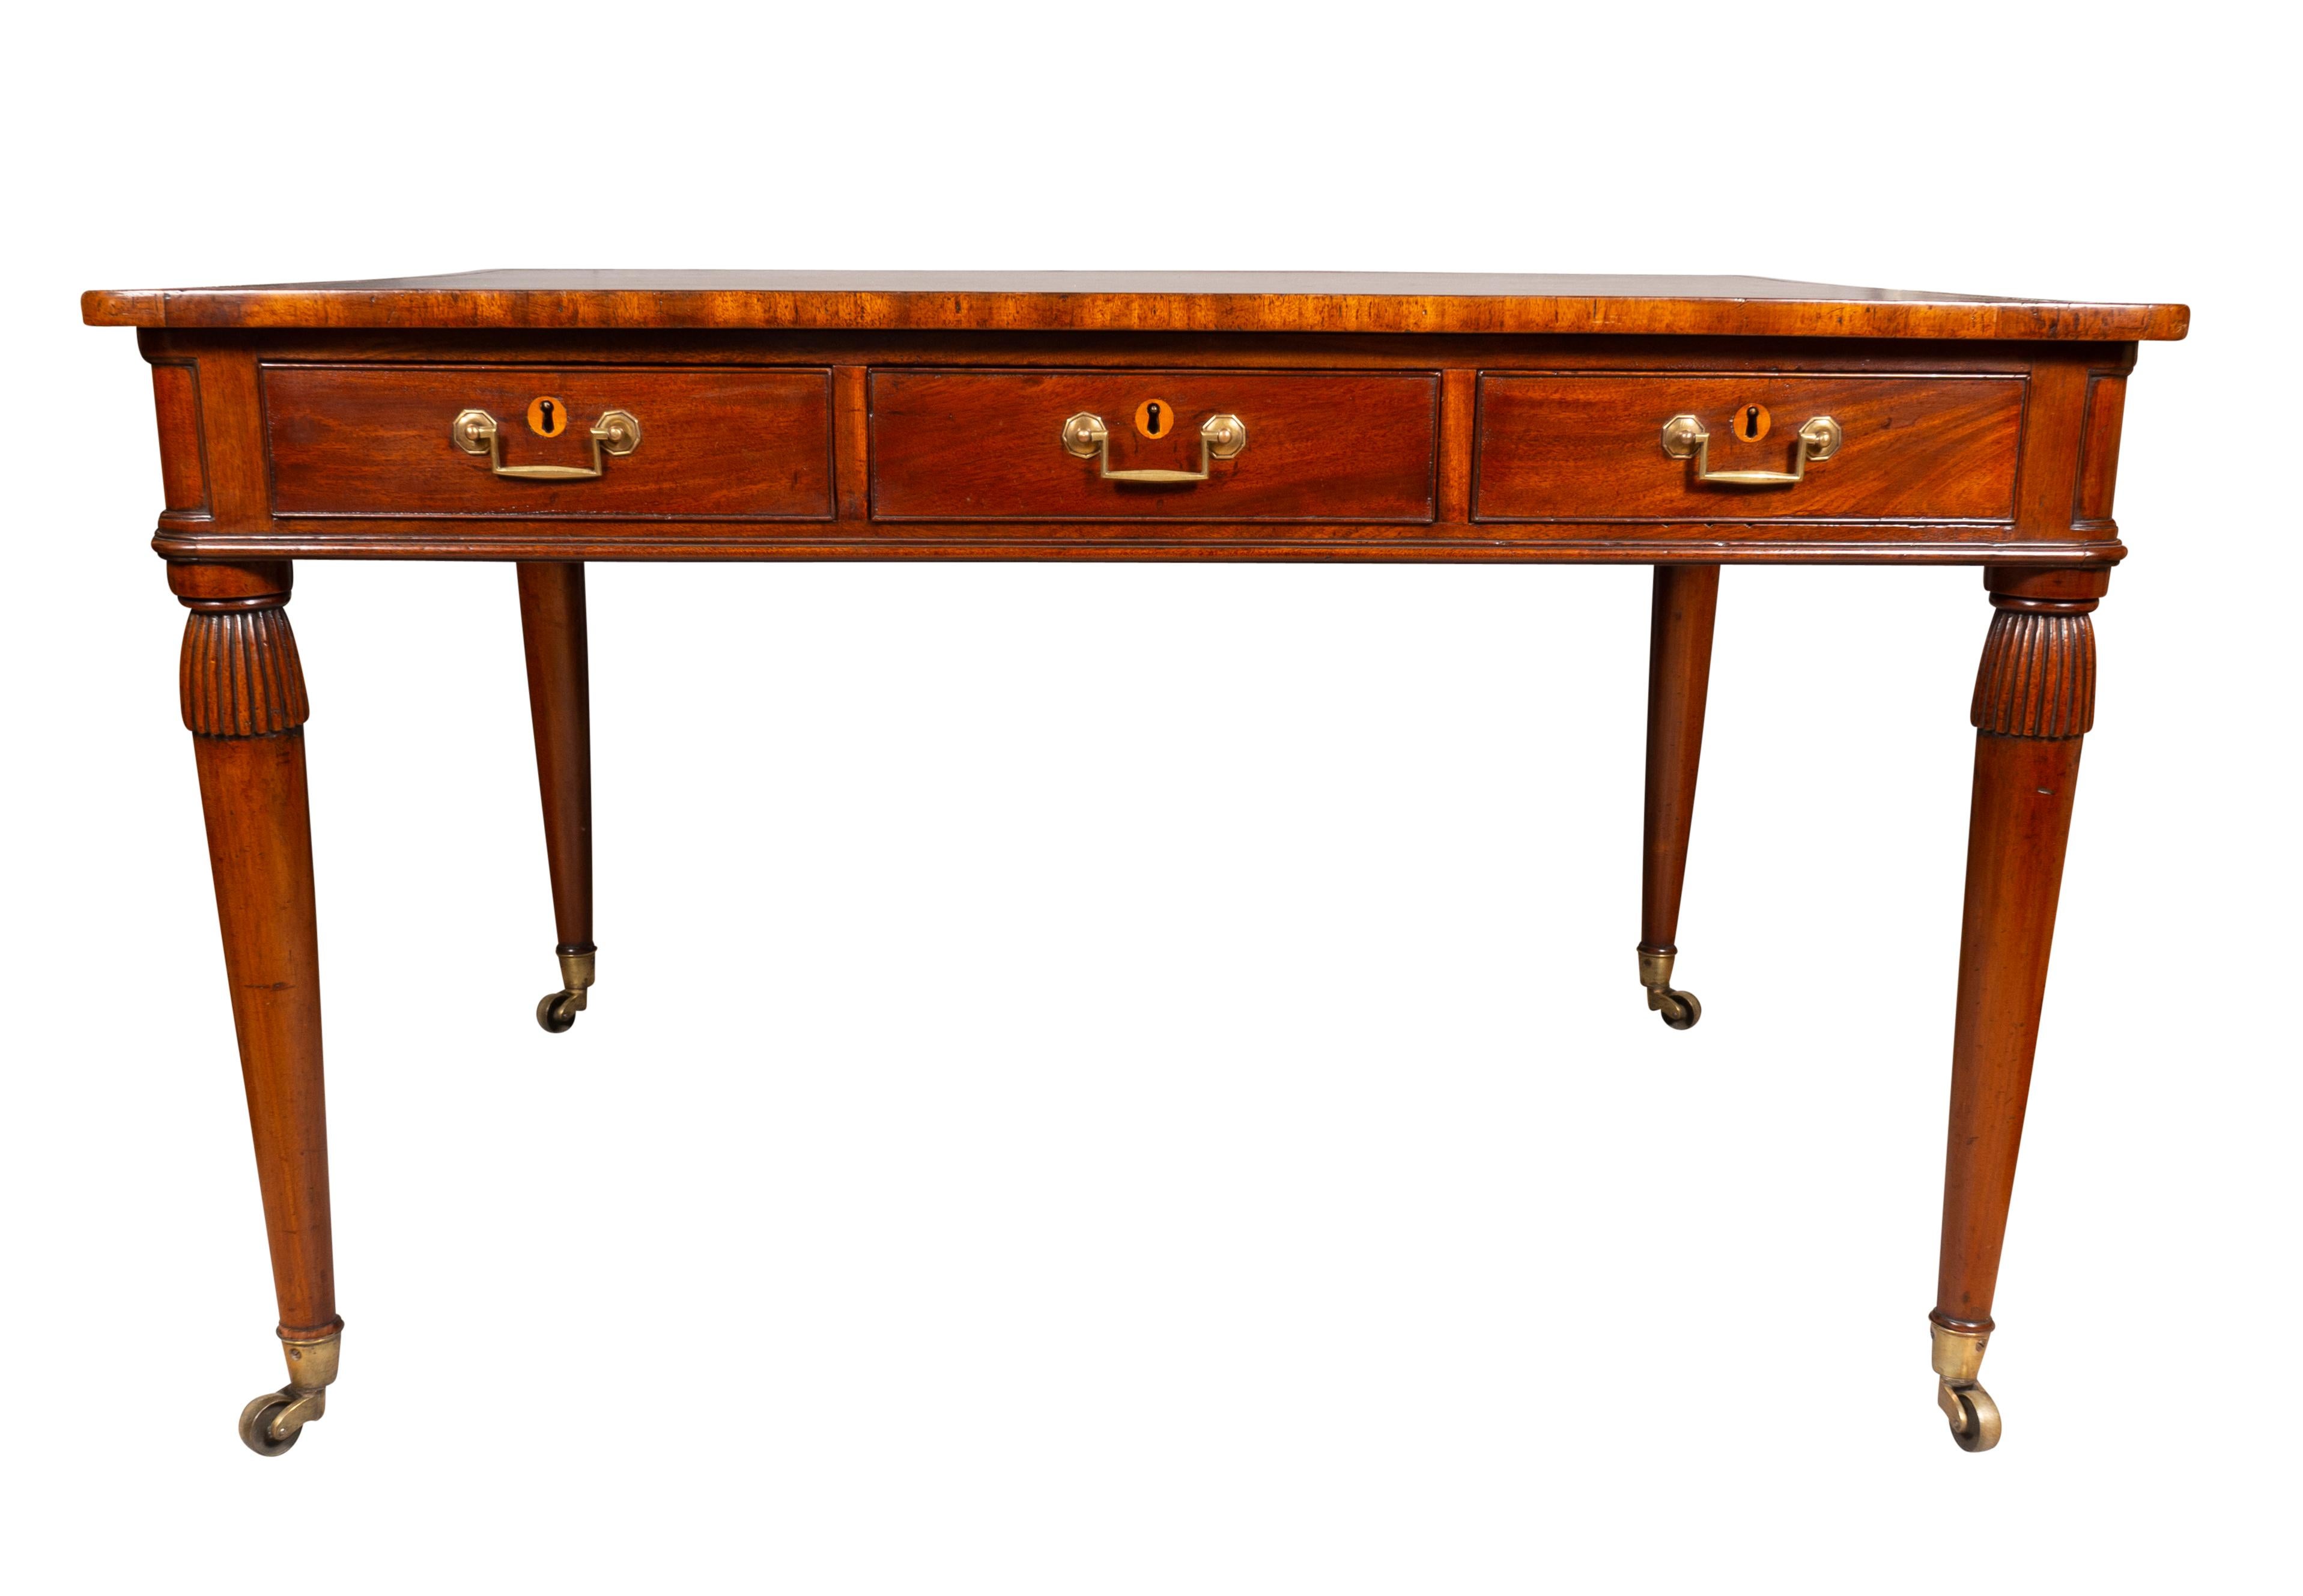 With a rectangular brown tooled leather top and banded border over three drawers with square bail handles and opposing working drawers so can work as a partners desk. Raised on circular tapered legs headed by reeded tassel carving.Raised on brass